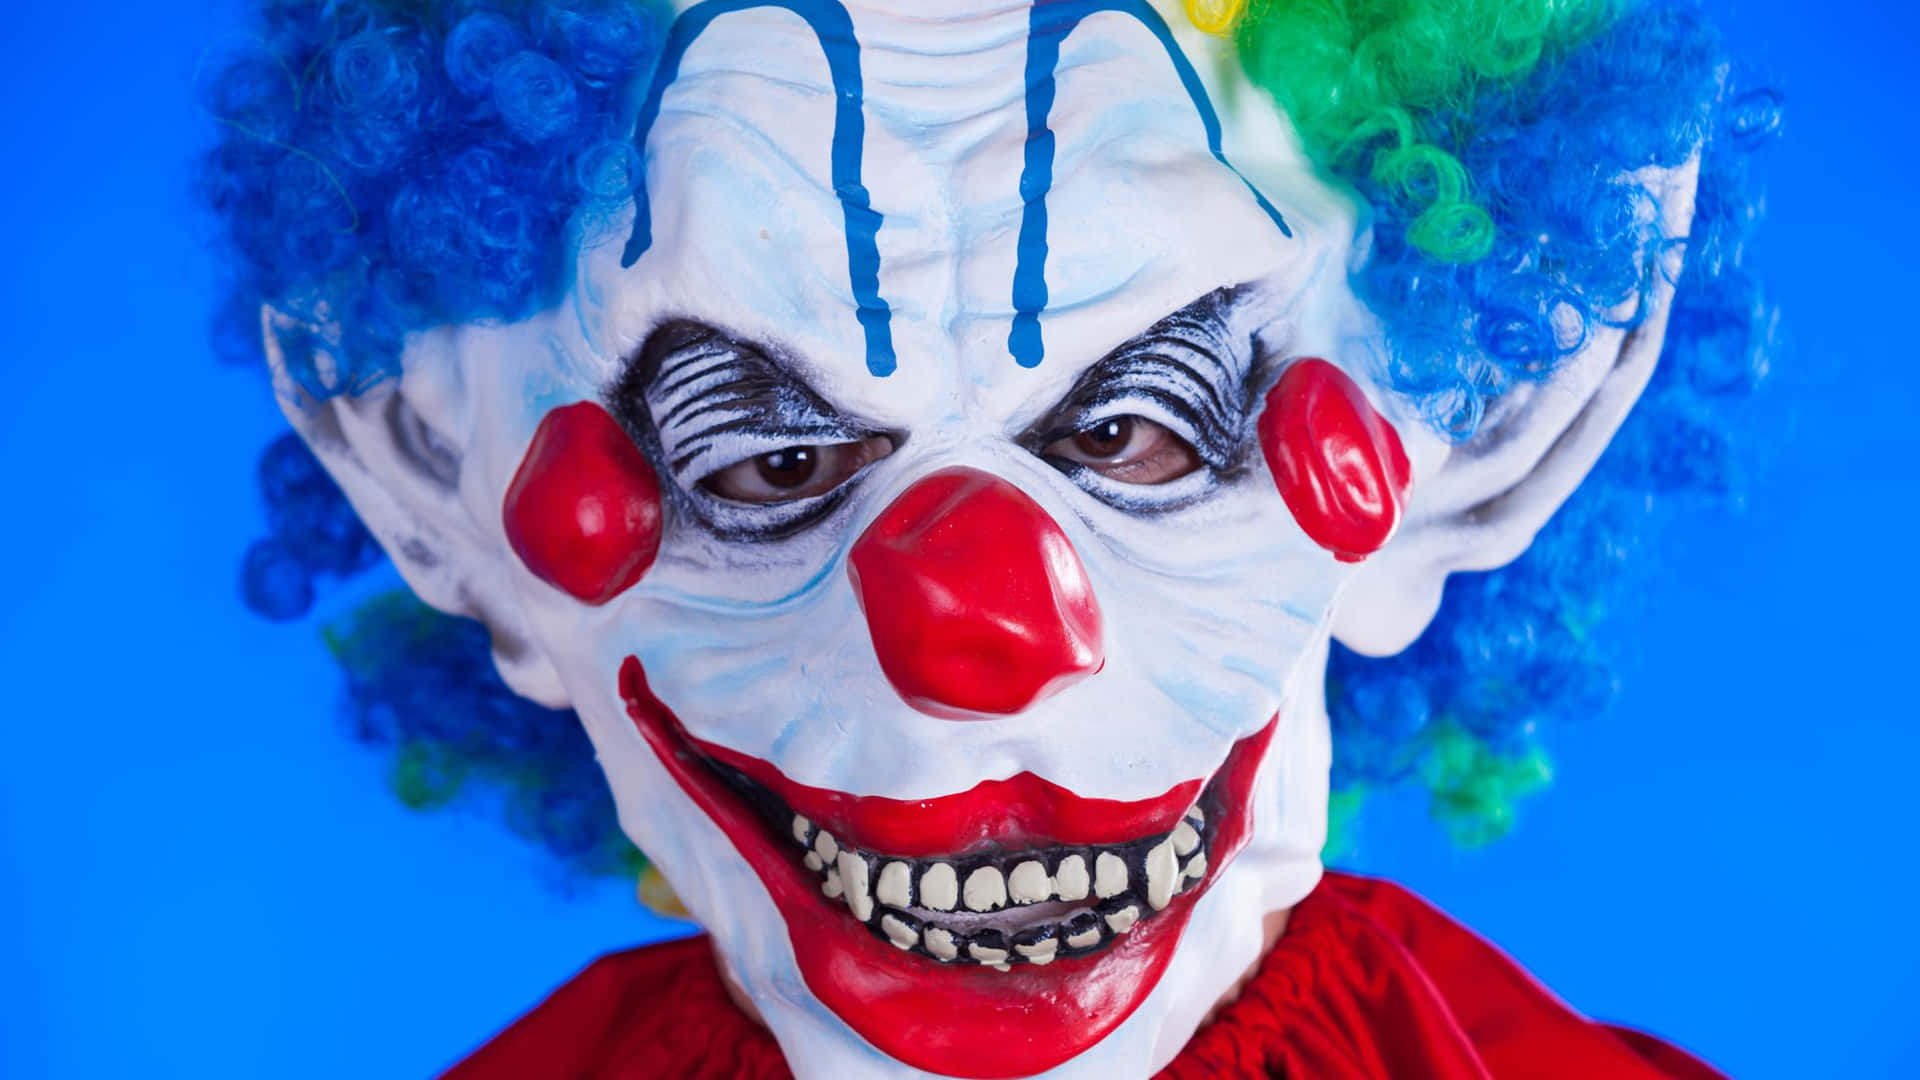 clown mask with colorful hair and red nose